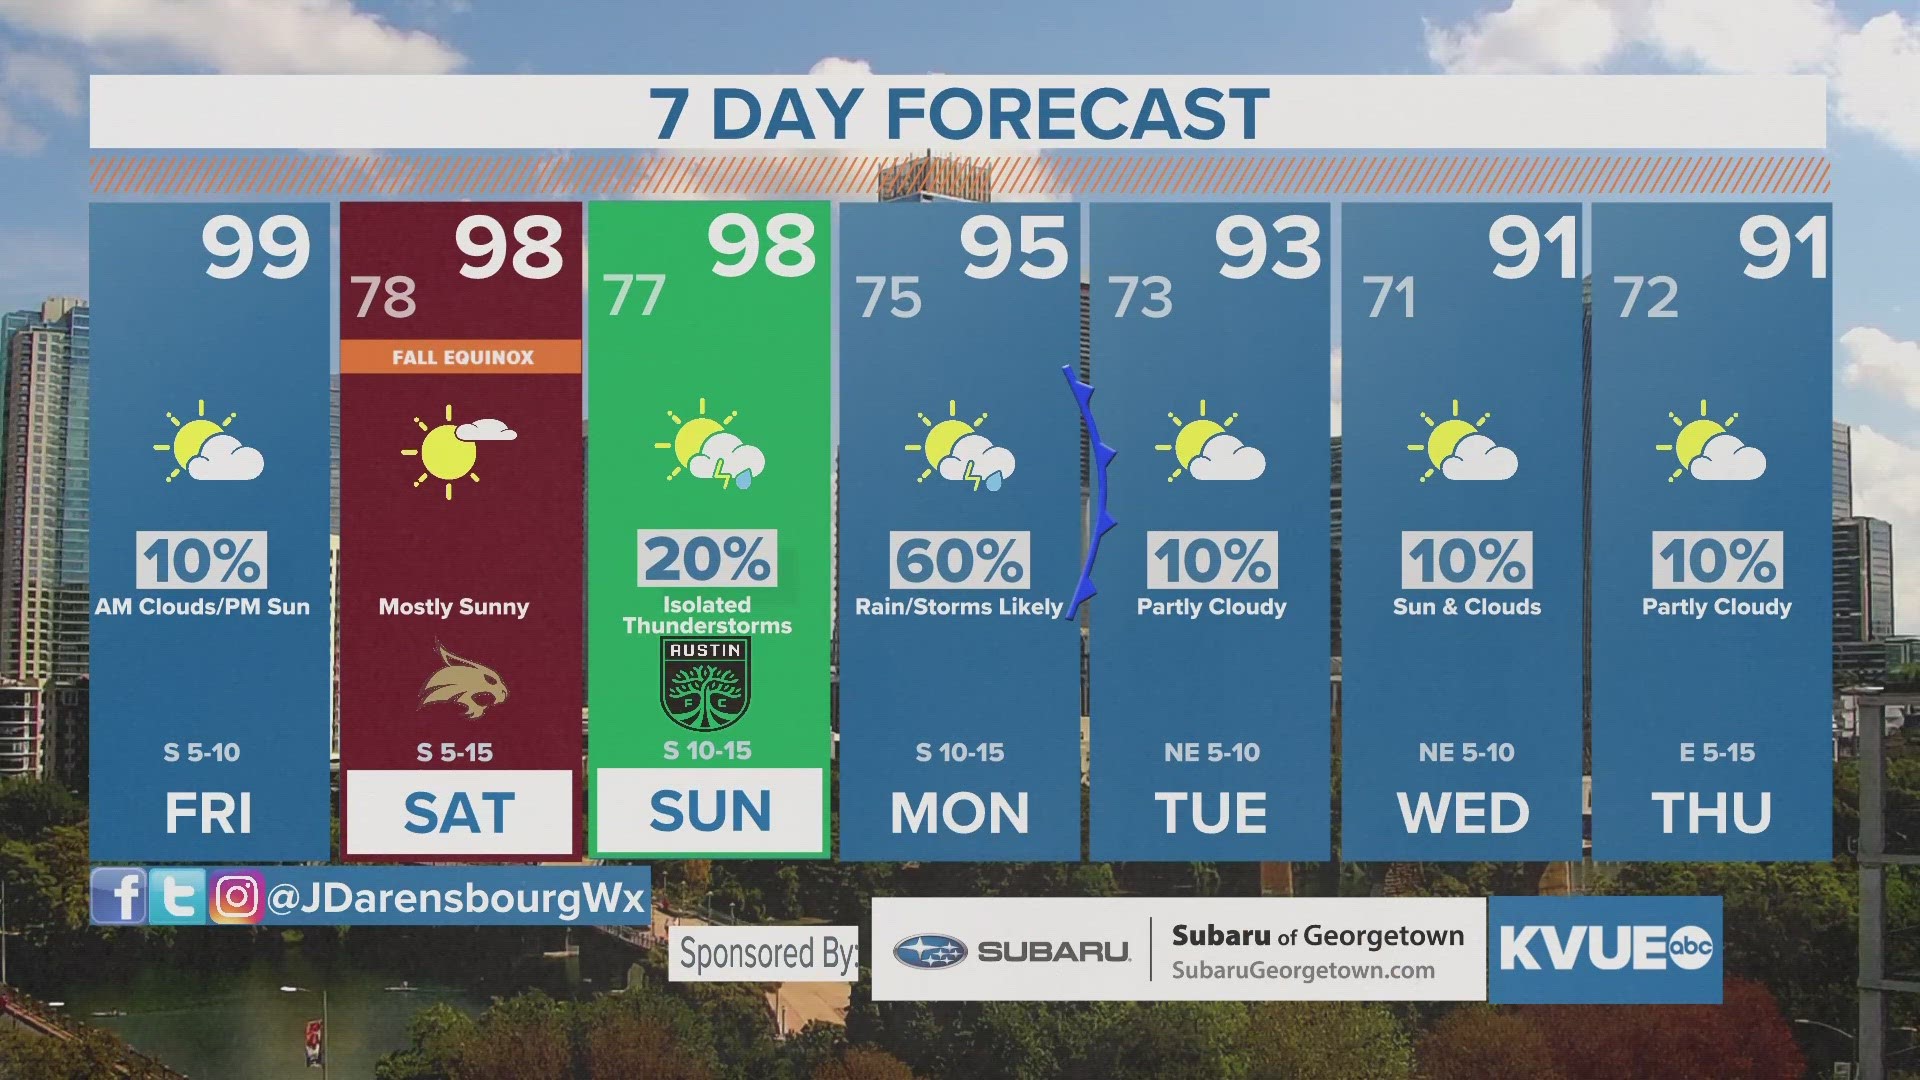 Heat continues through the weekend; best storm chances on Monday